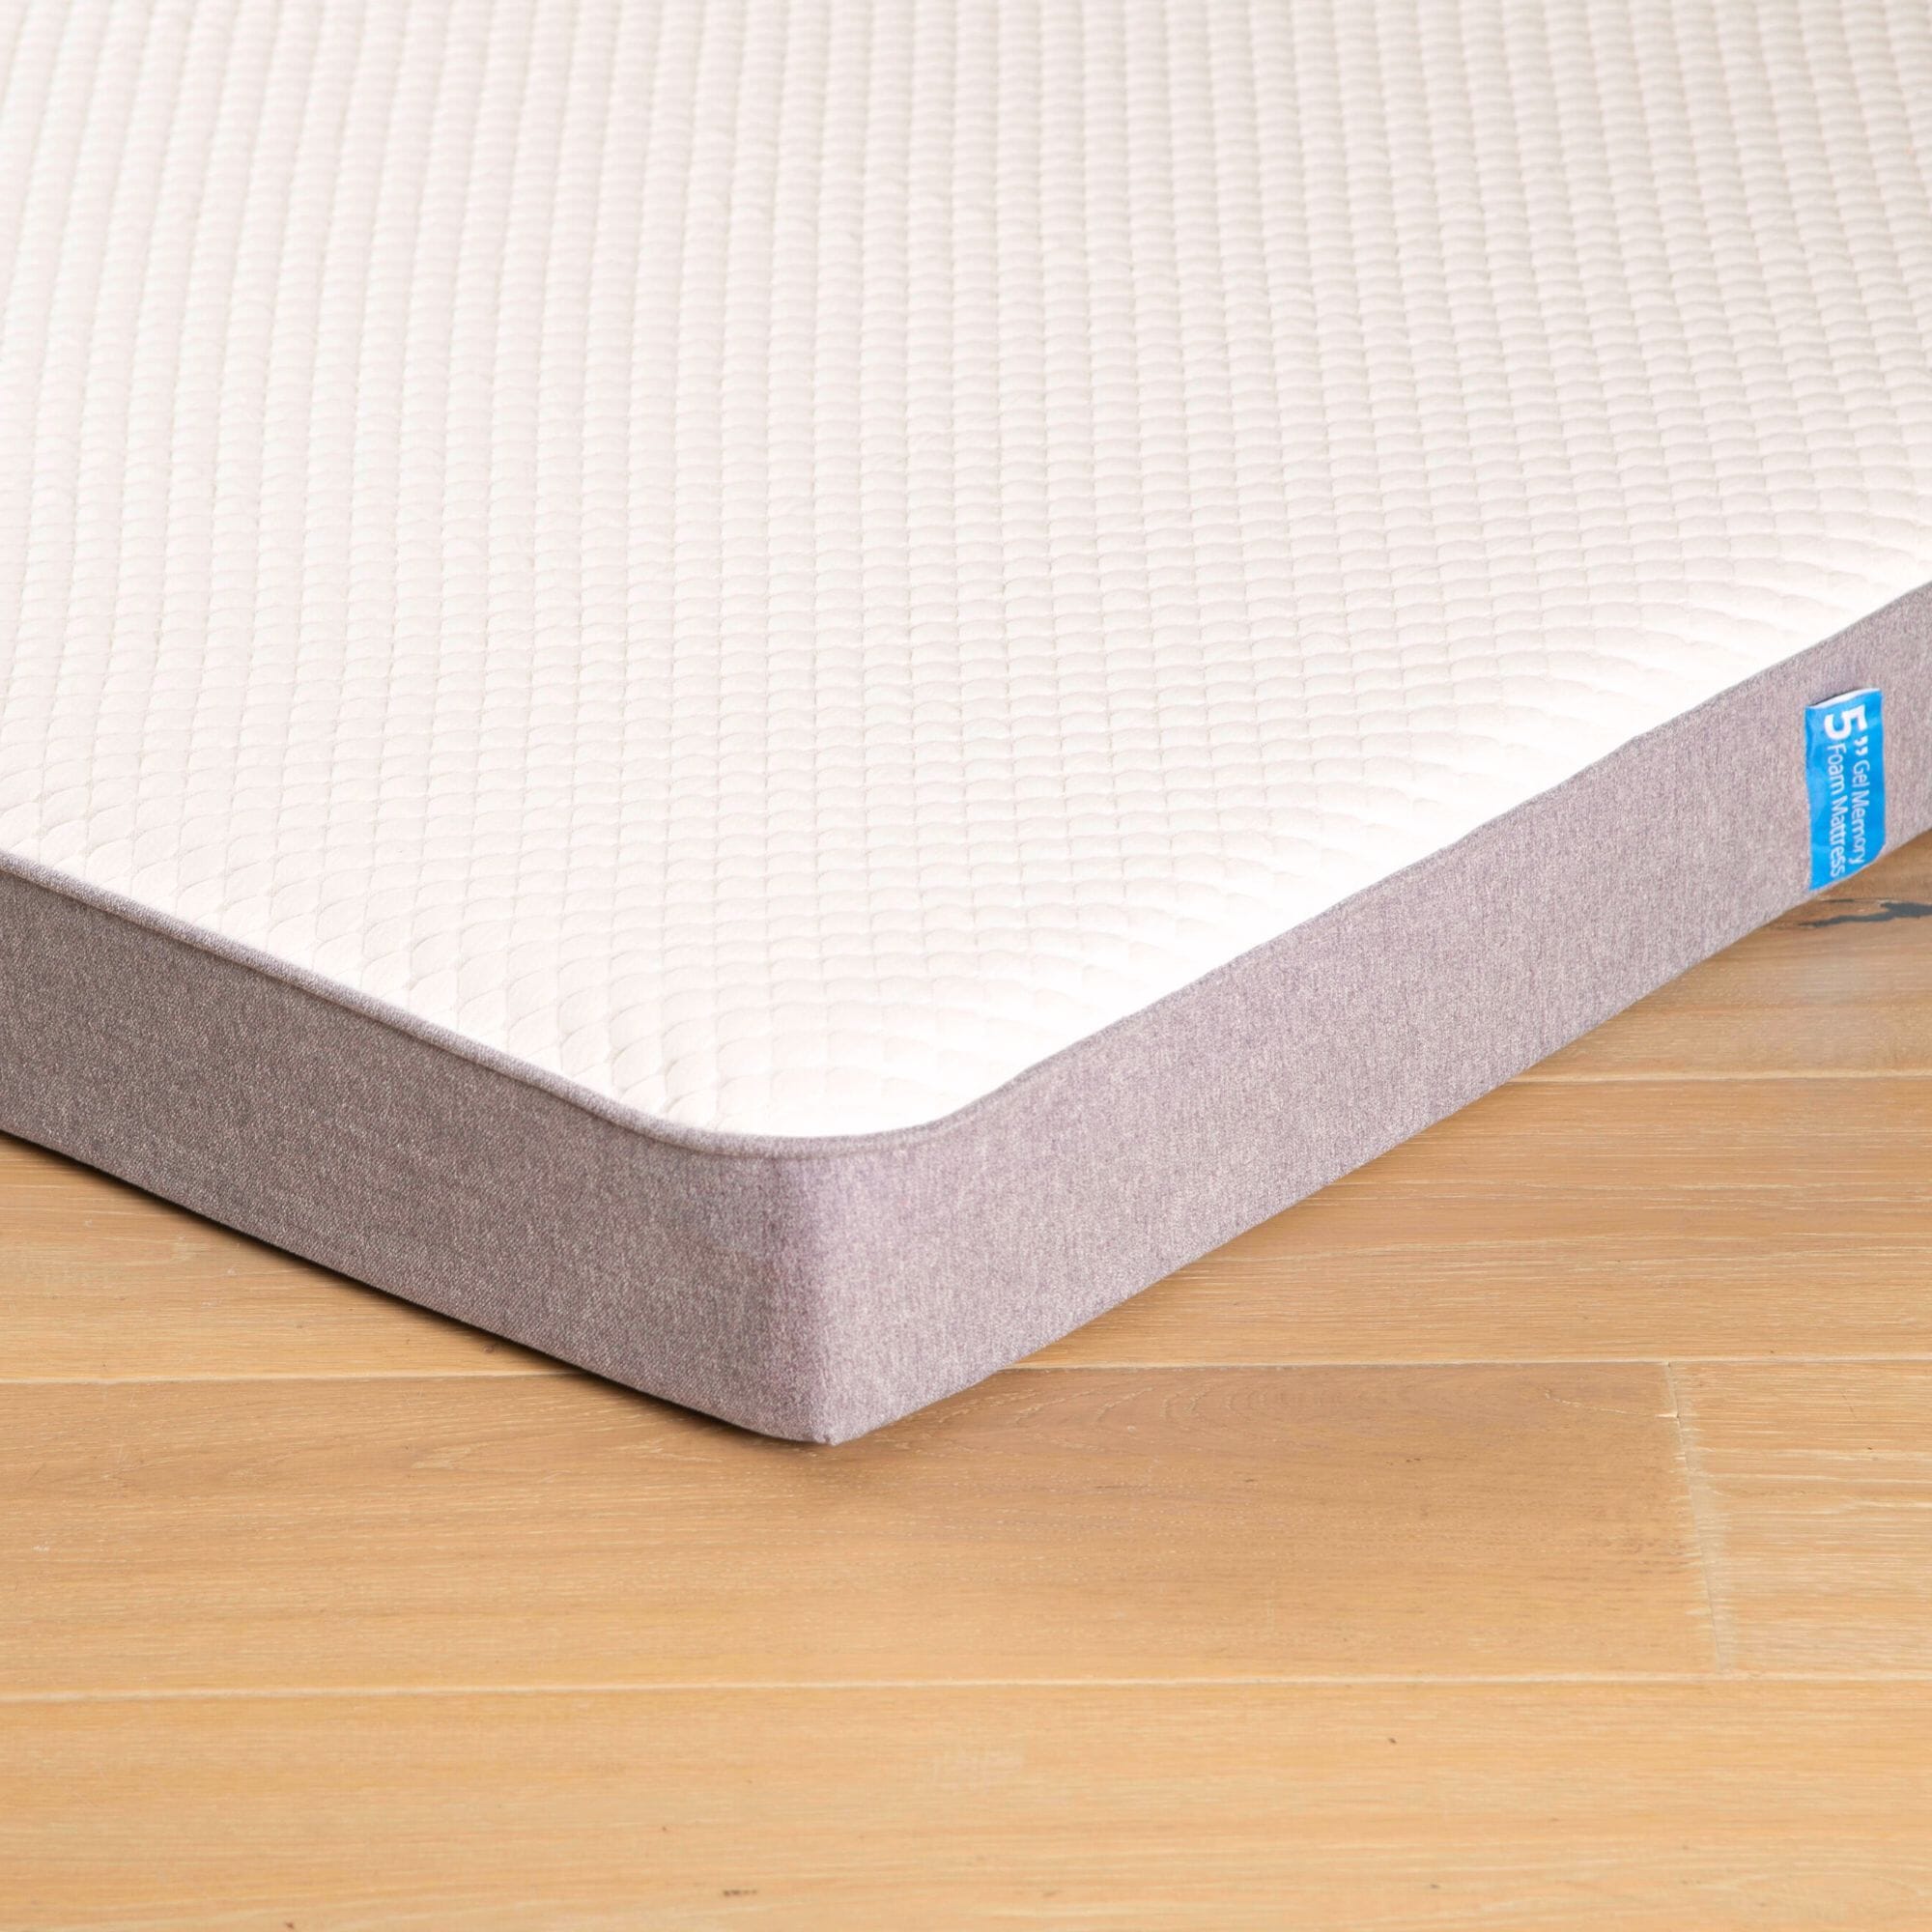 Protect Bed with a Premium Mattress Cover- Beds by Tomorrow